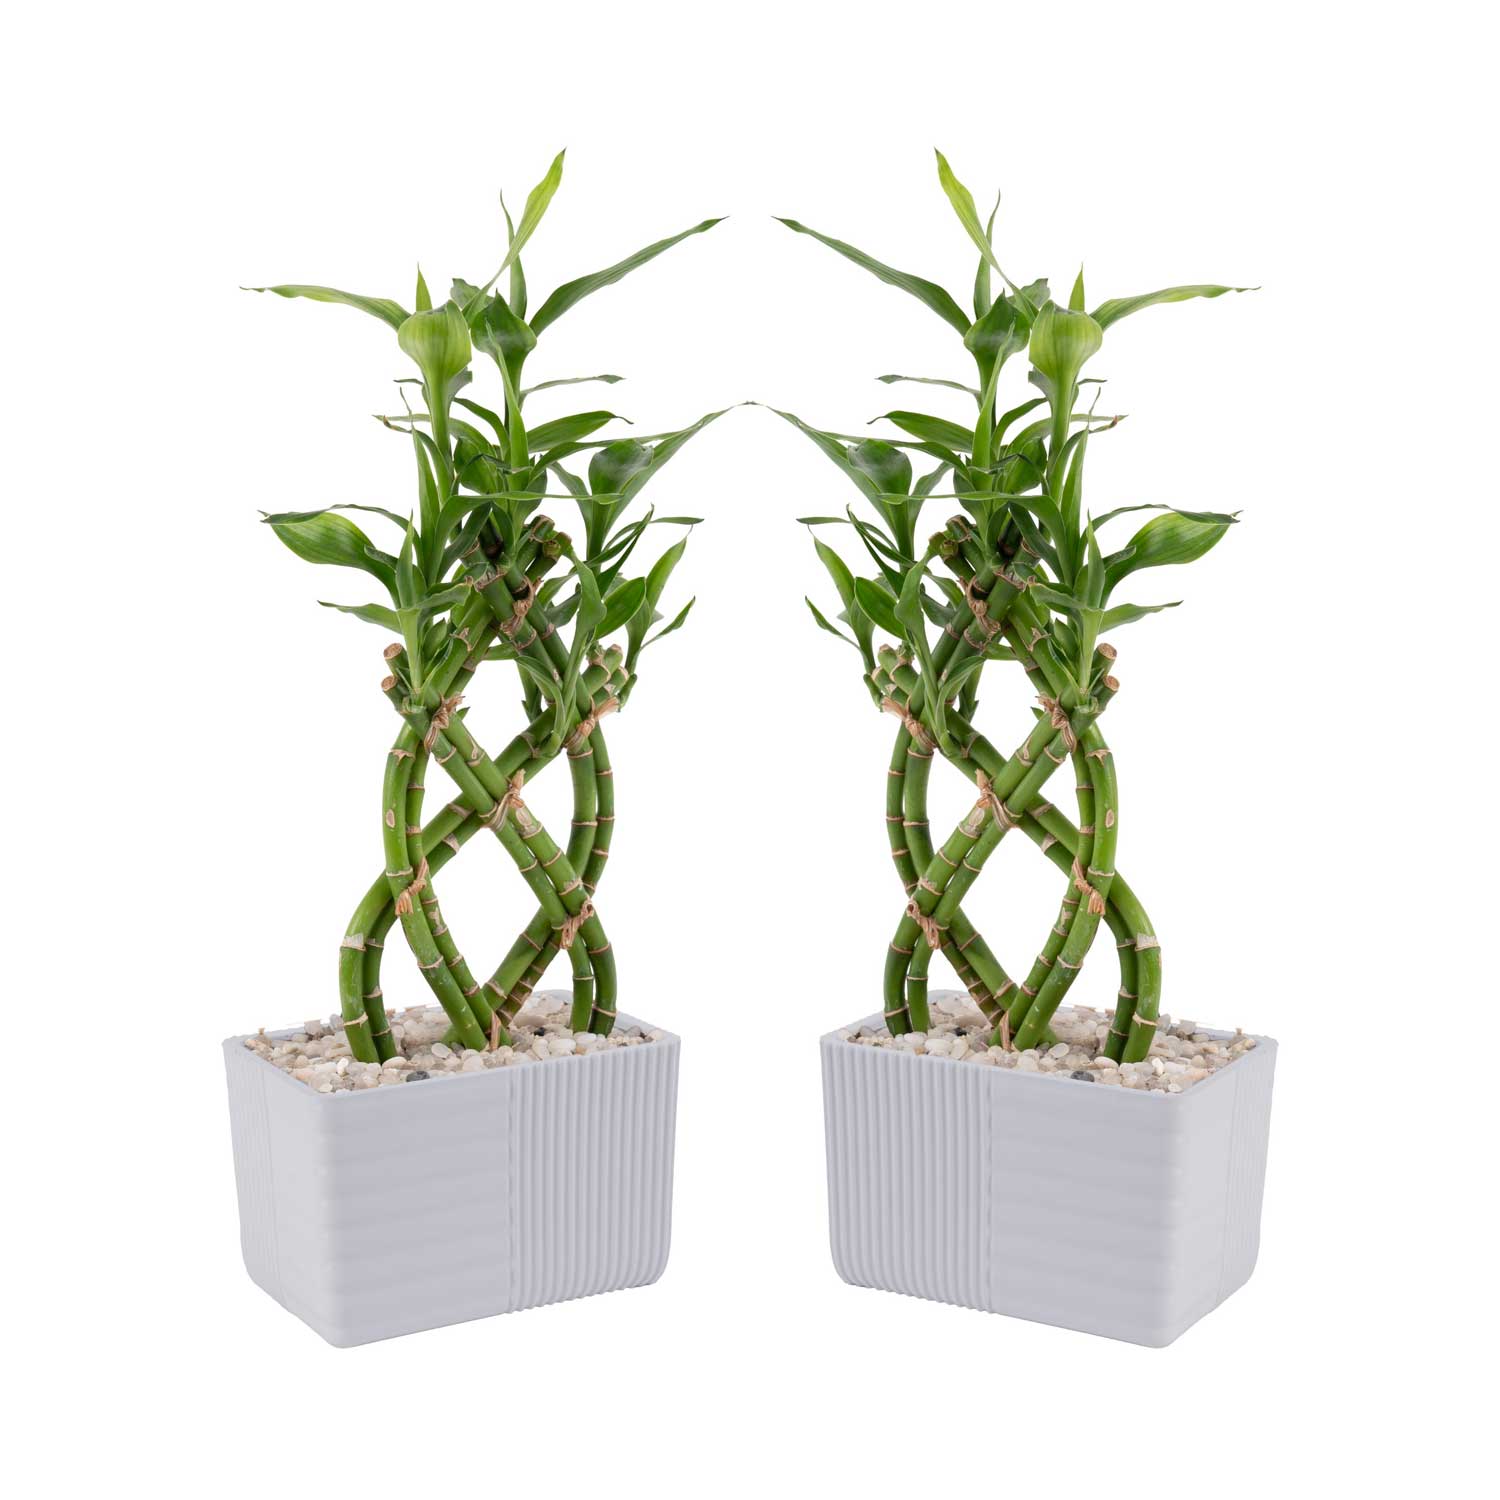 Costa Farms Live Indoor 12in. Tall Lucky Bamboo; Low, Indirect Light Plant, 5in. Ceramic Planter,2-Pack - image 1 of 9